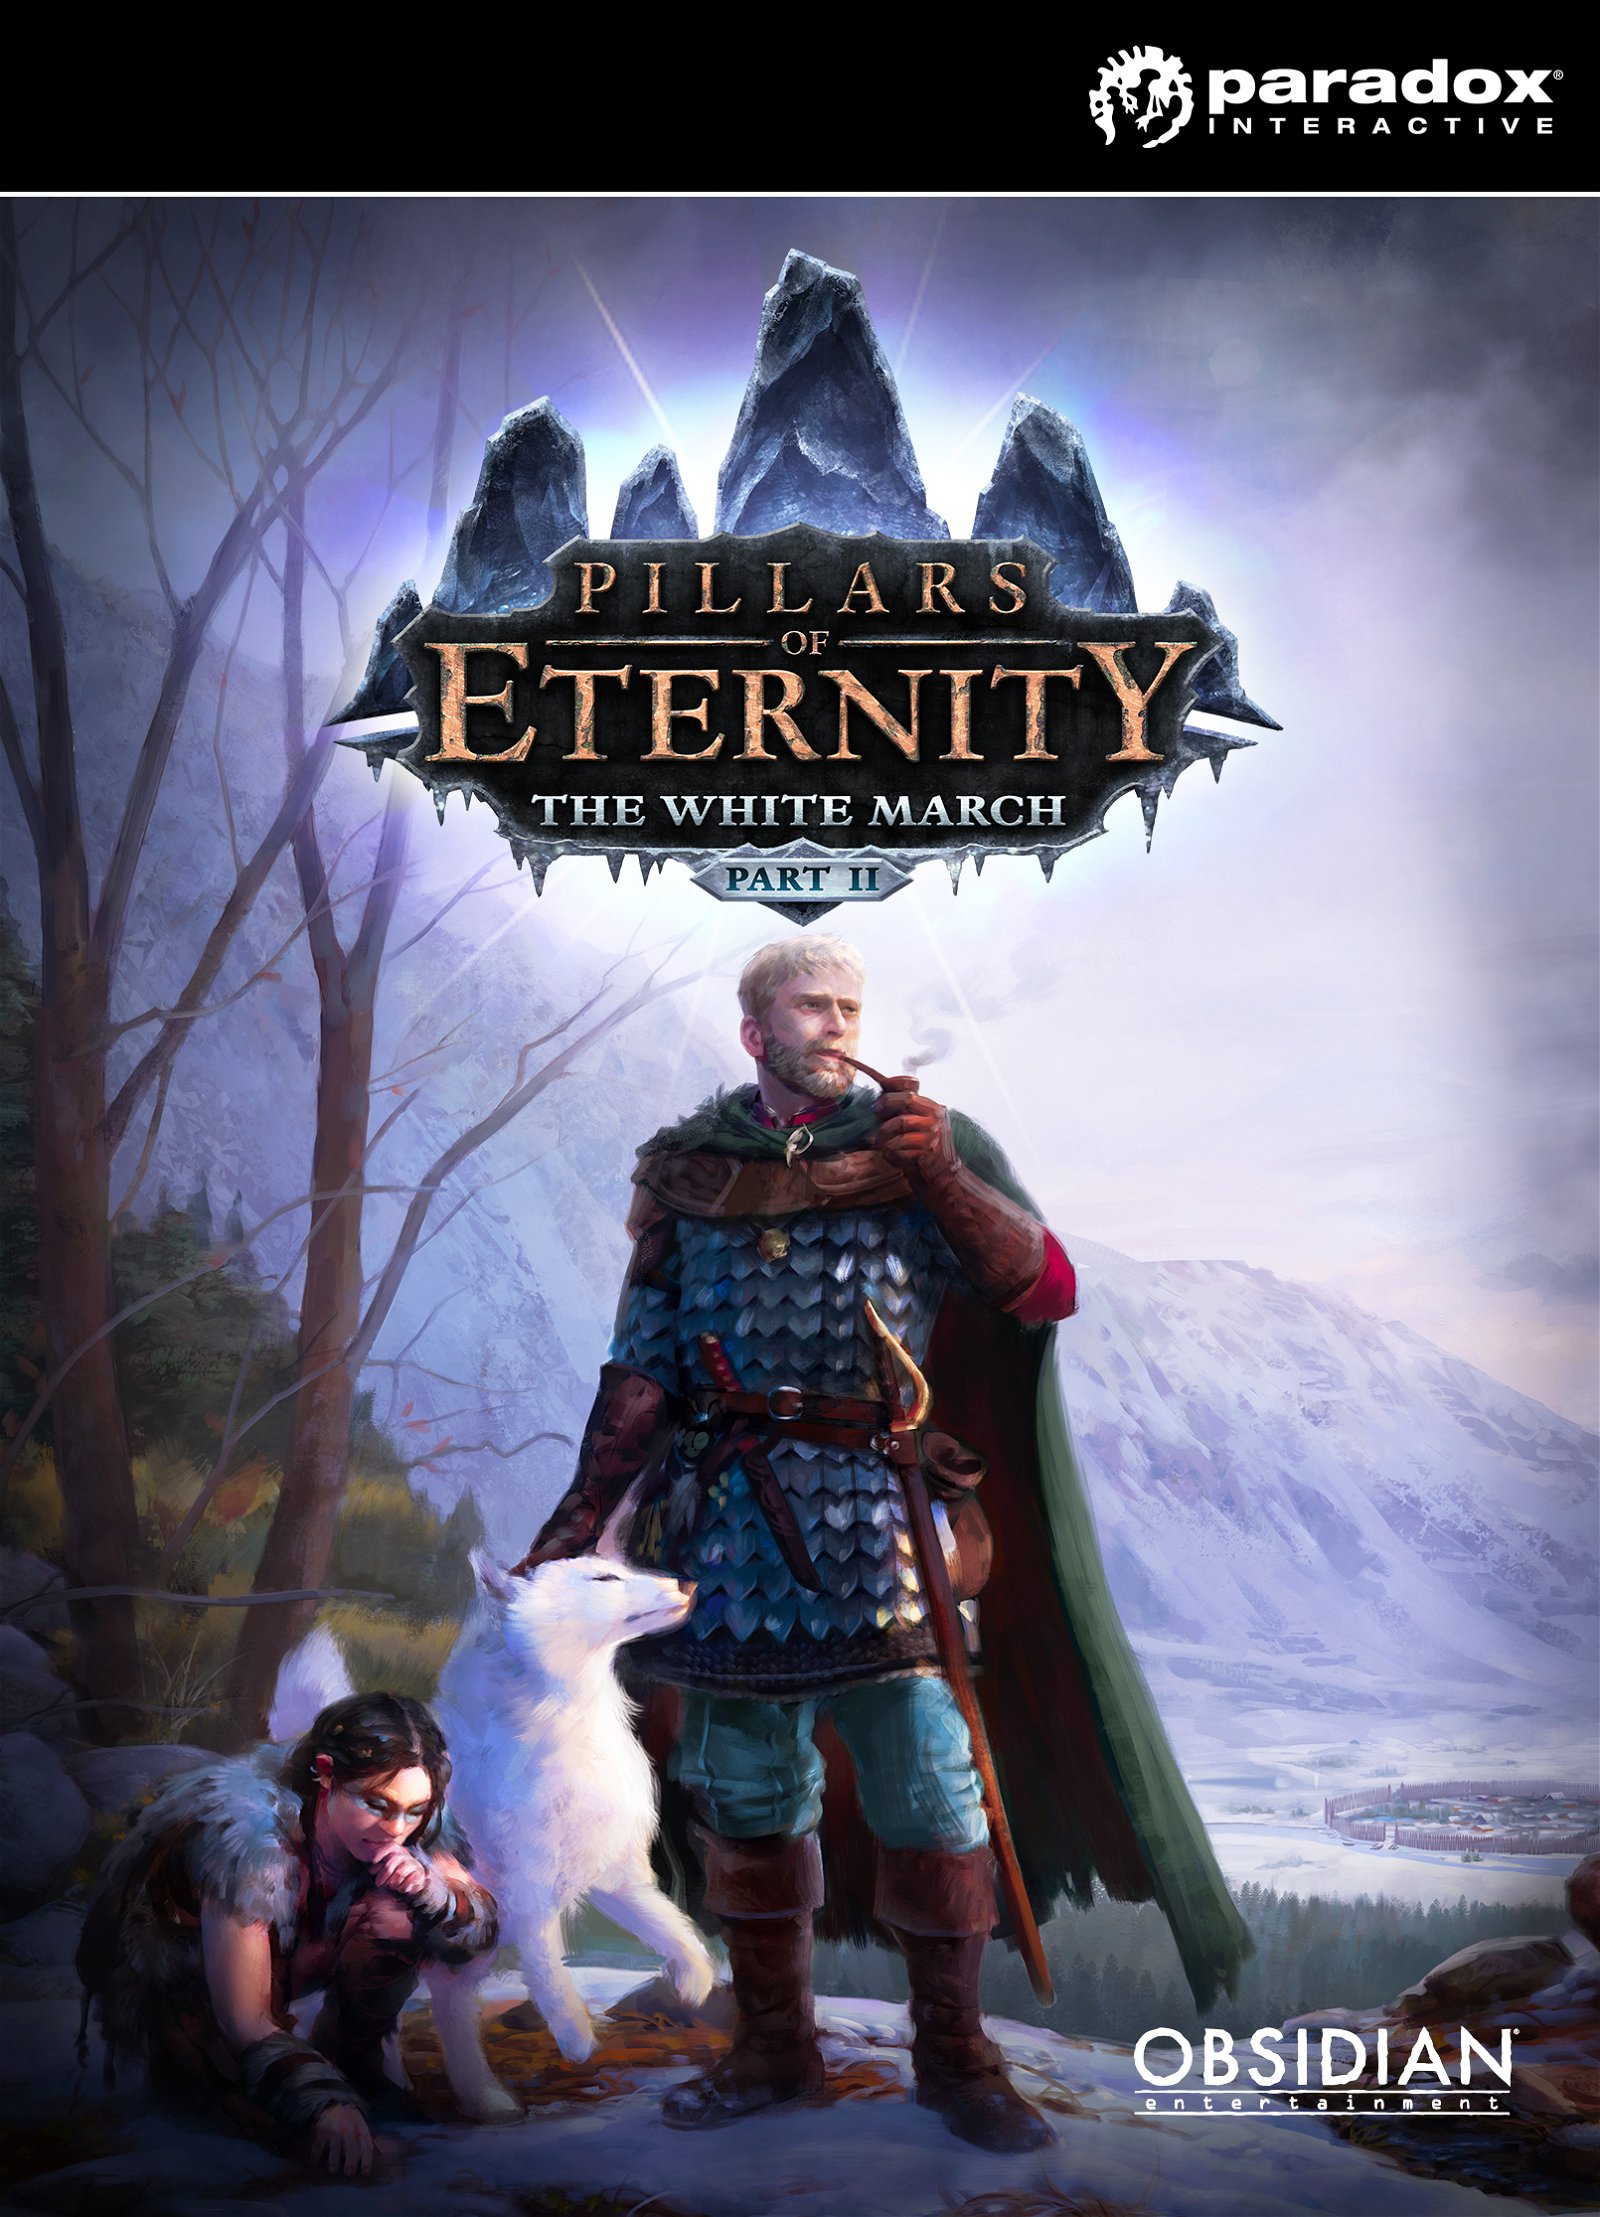 Image of Pillars of Eternity: The White March Part II